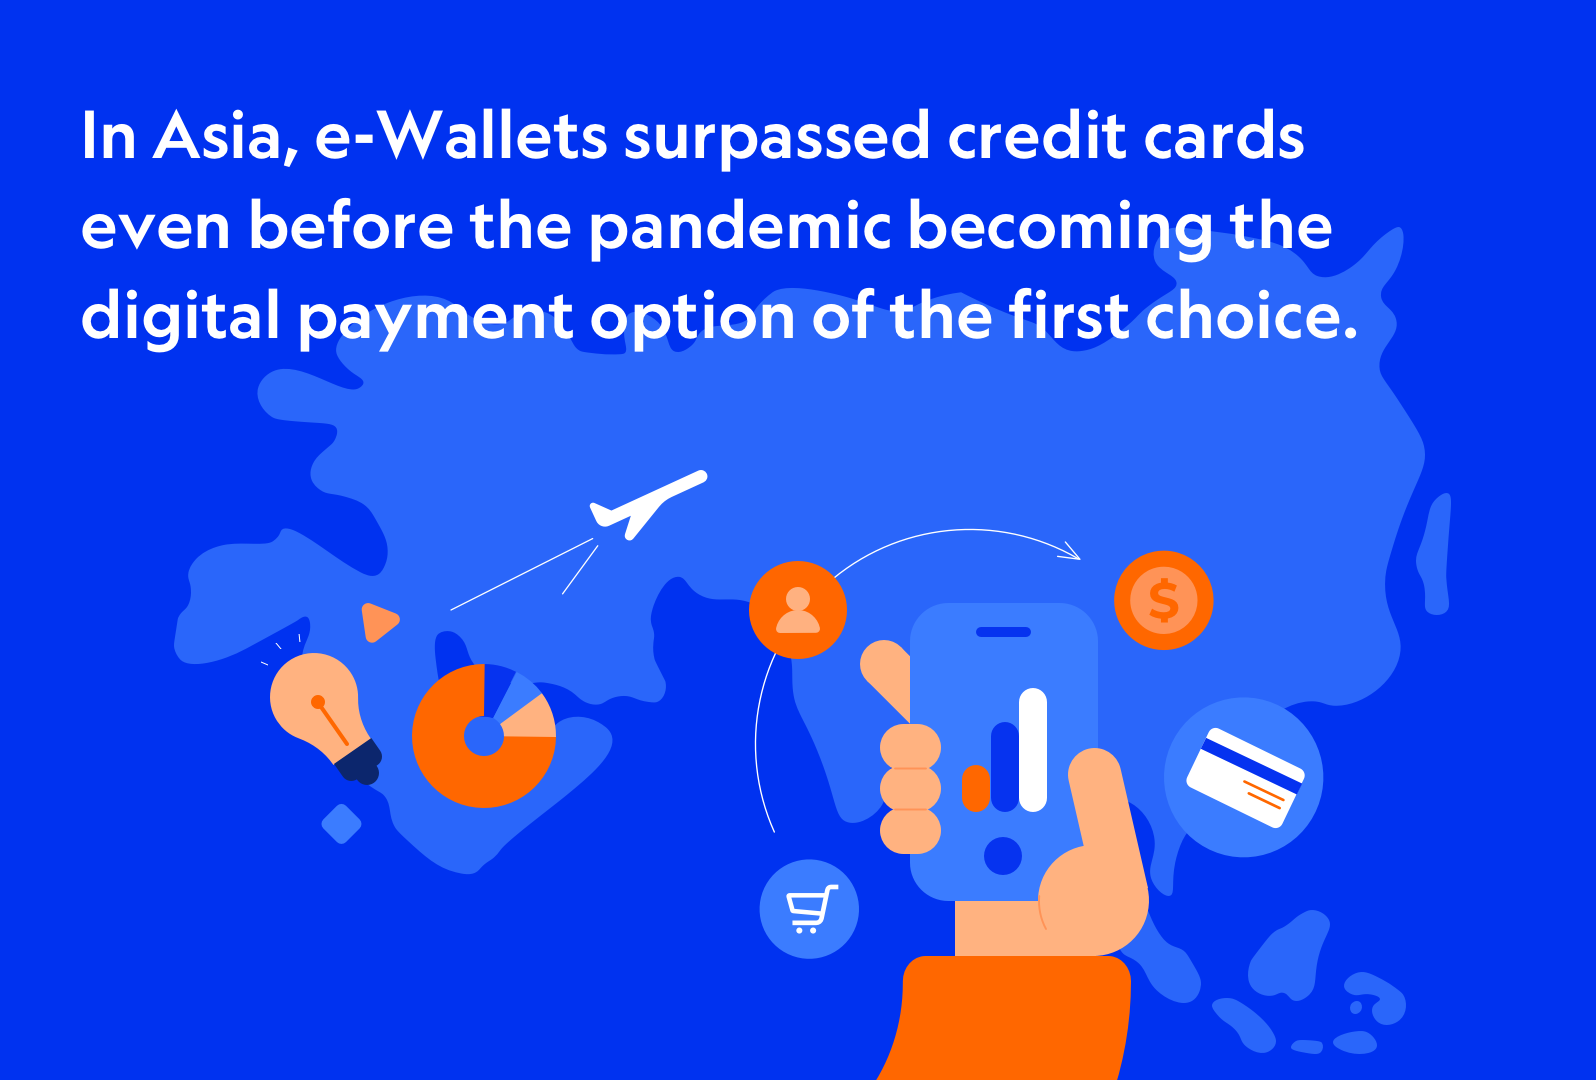 e-Wallets surpassed credit cards even before the COVID-19 pandemic